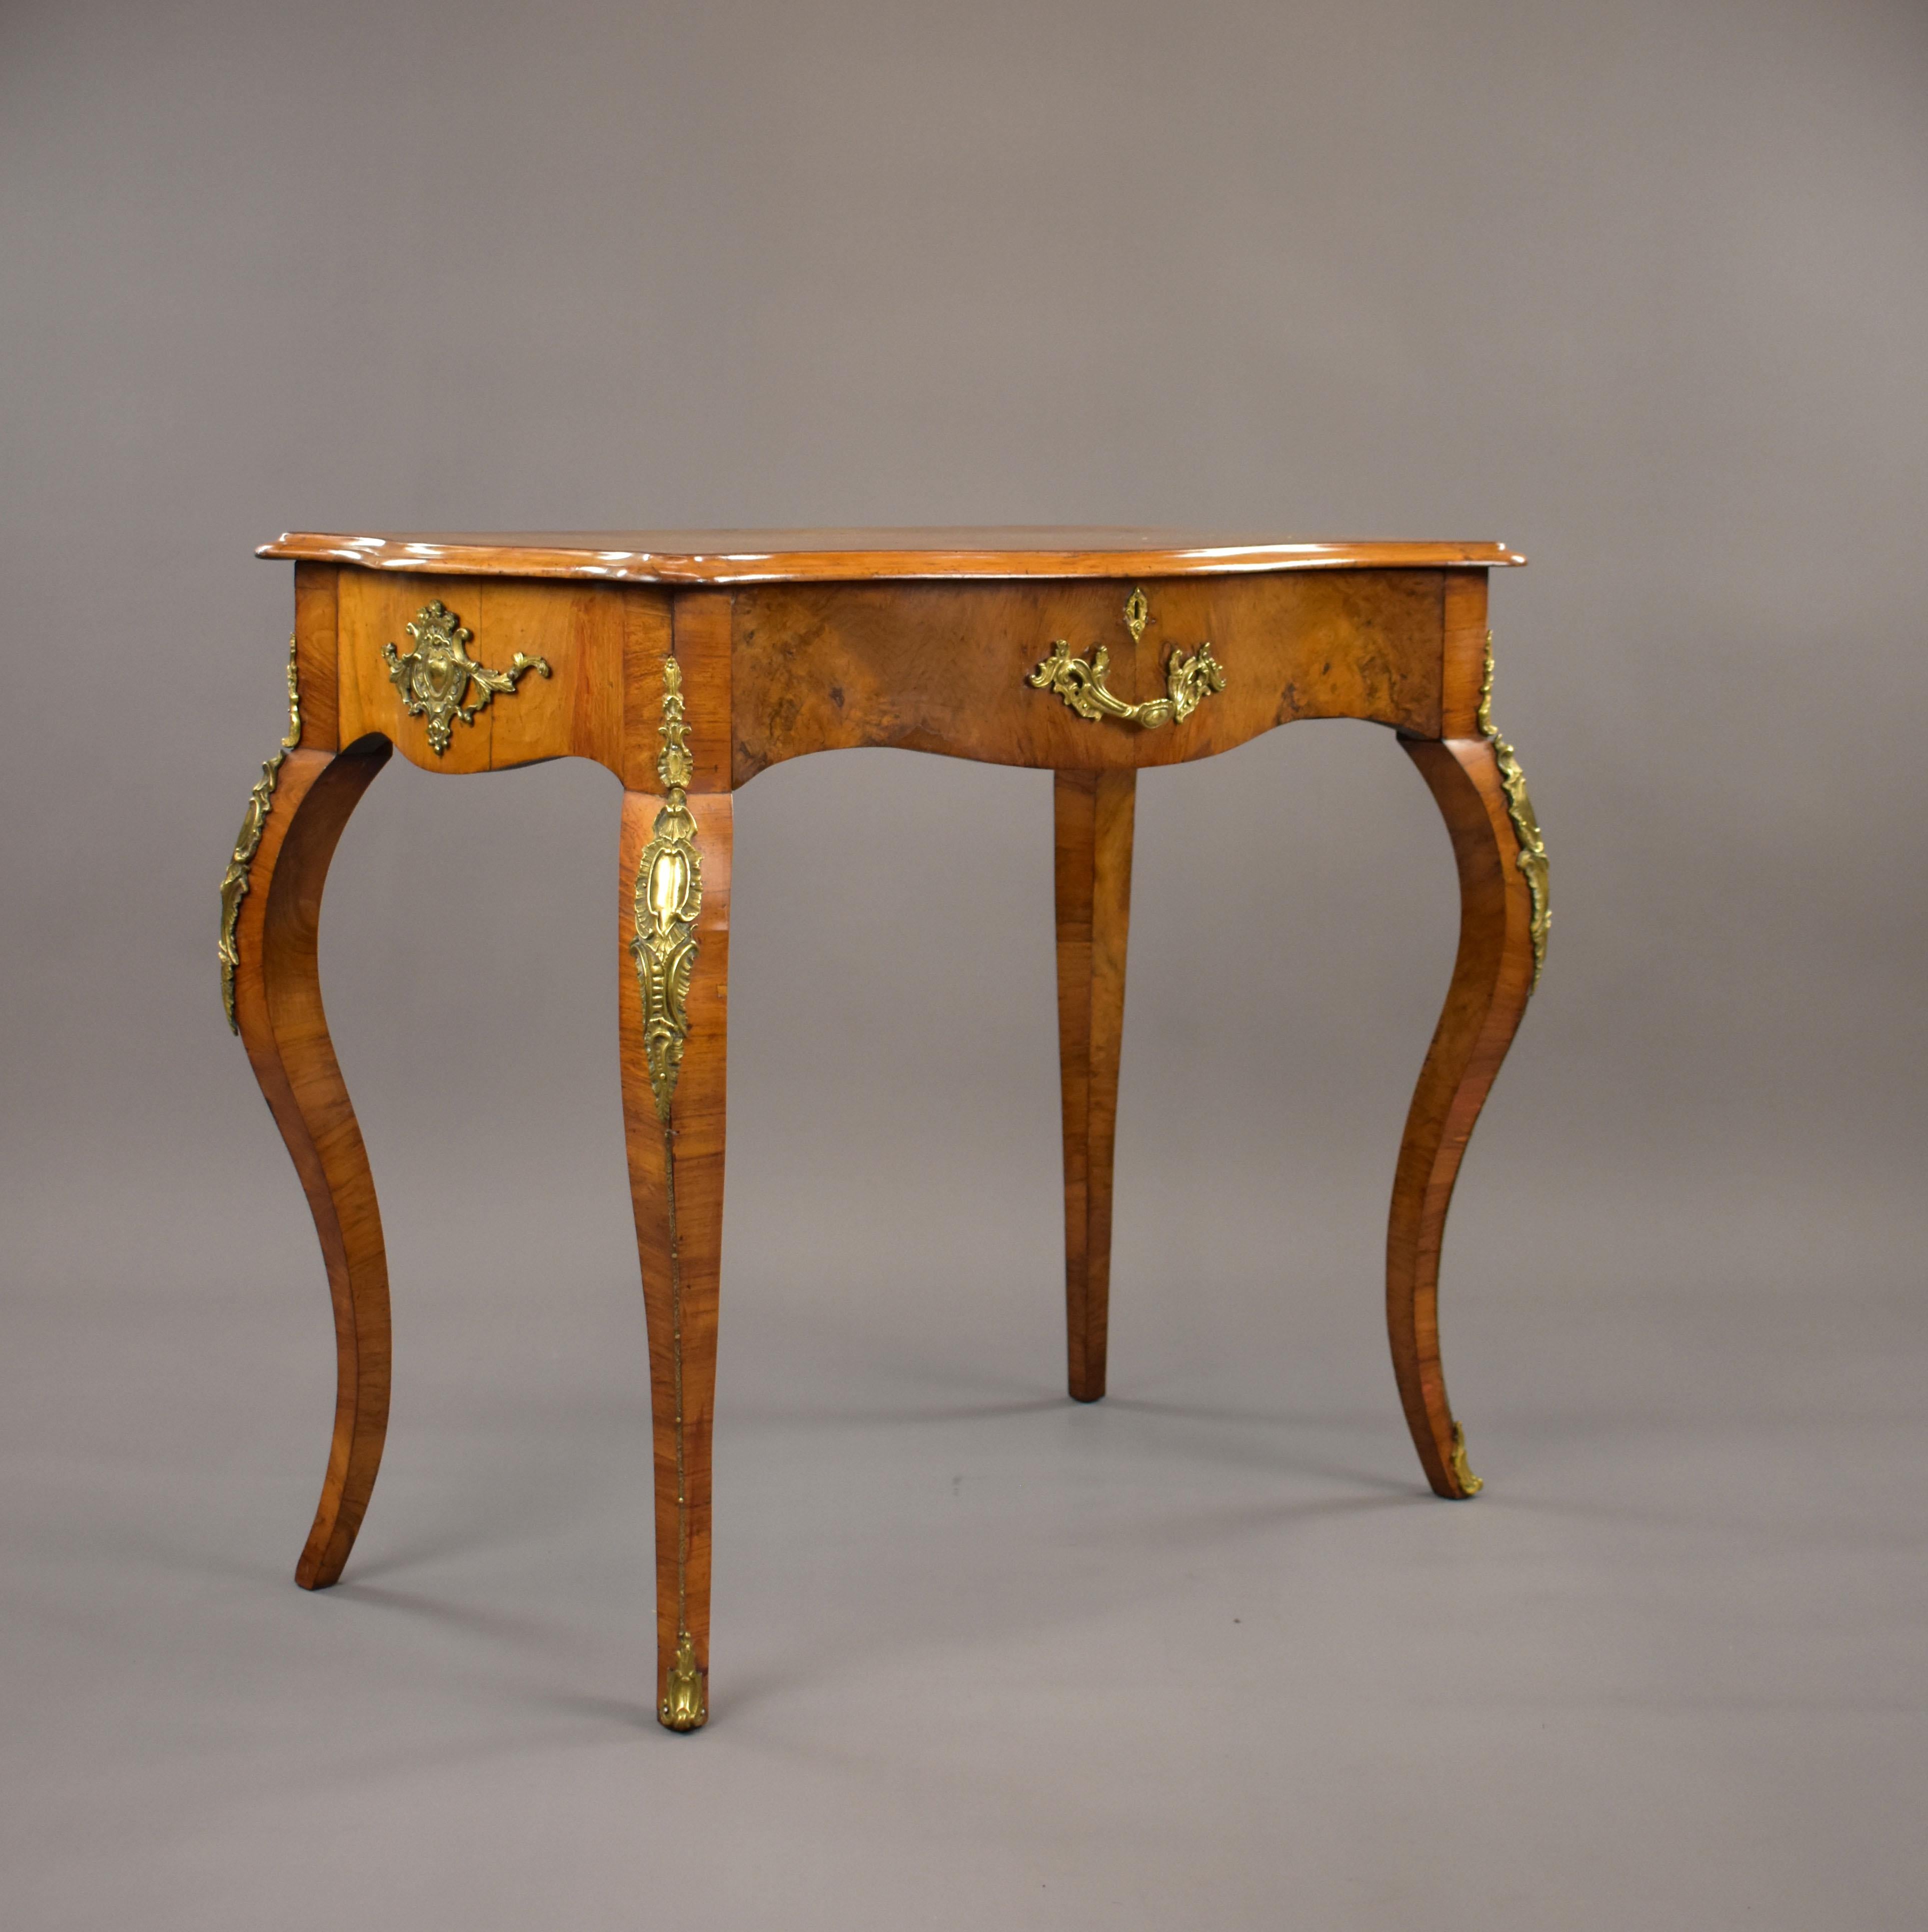 For sale is a 19th century French burr walnut writing table, having a single drawer, standing on elegantly shaped legs, the front two with decorative ormolu mounts. The table is in good condition, showing minor signs of wear commensurate with age